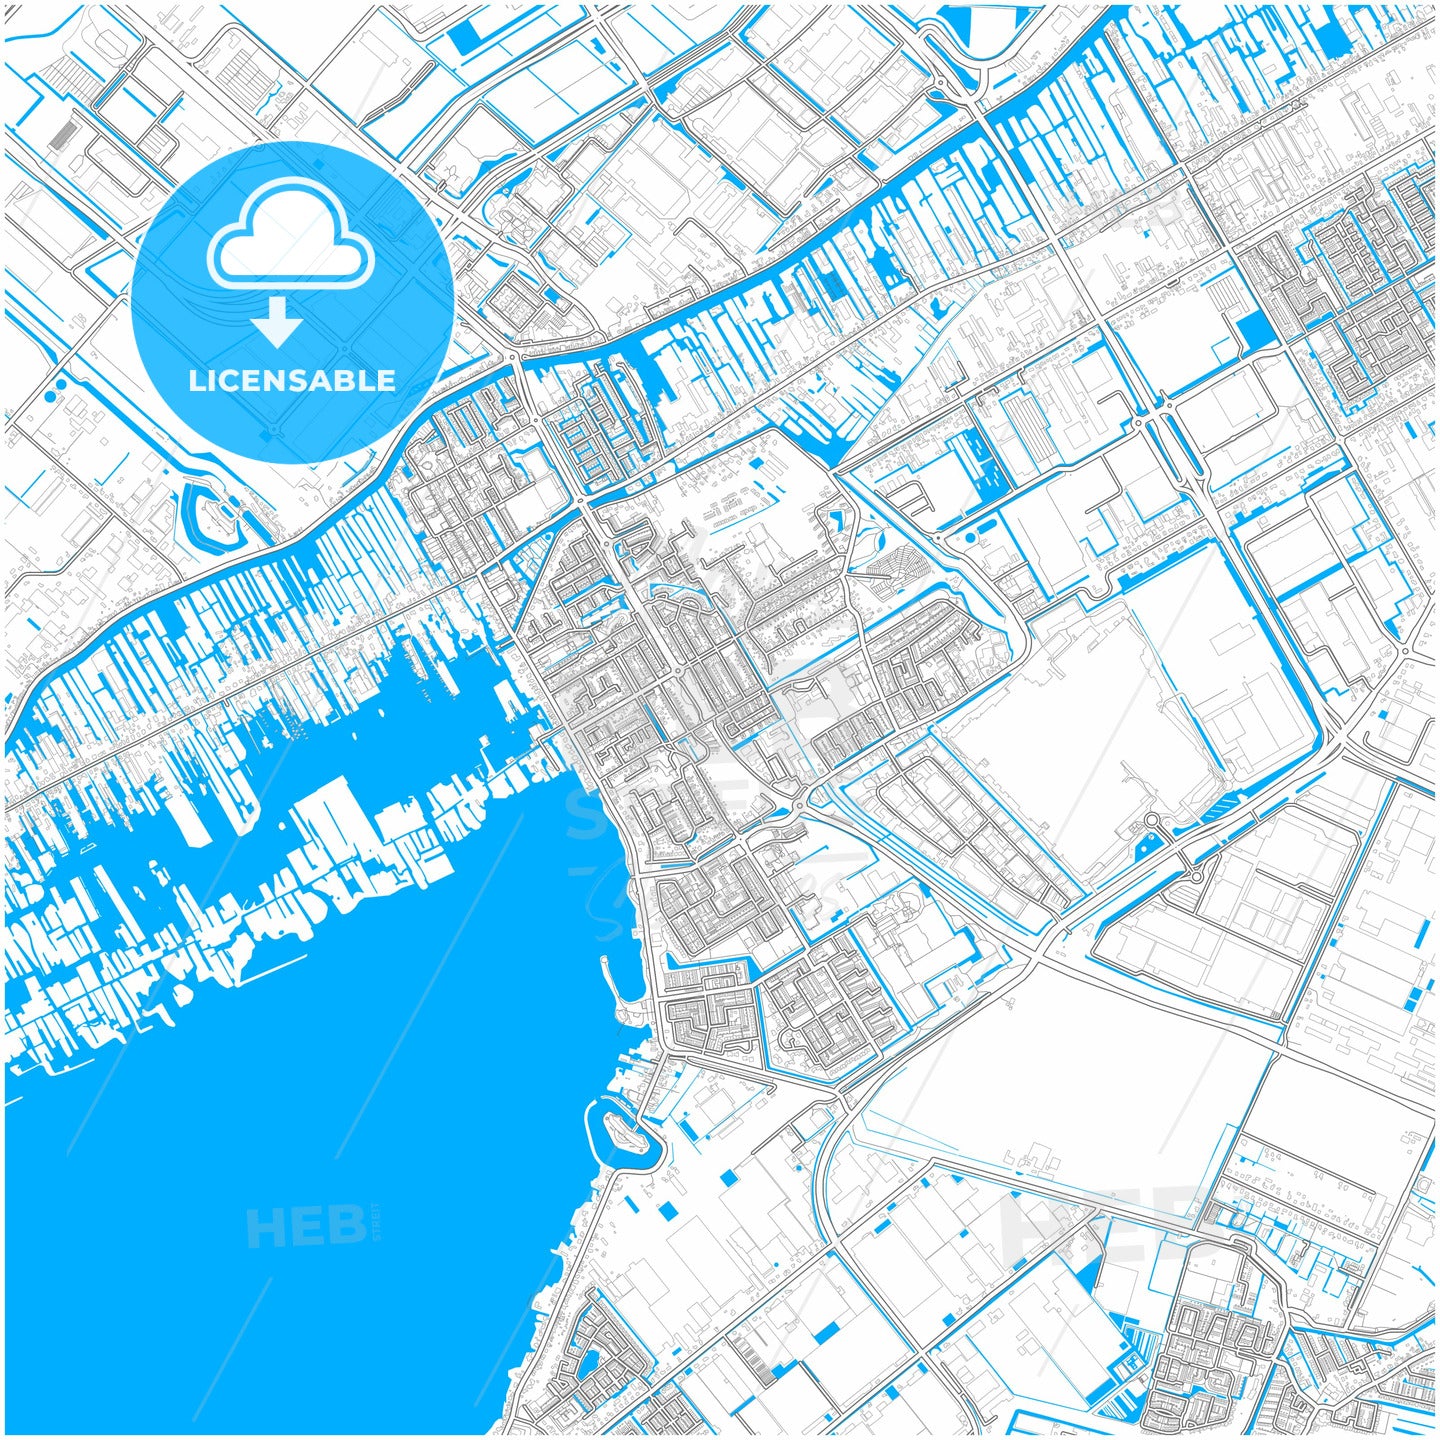 Aalsmeer, North Holland, Netherlands, city map with high quality roads.